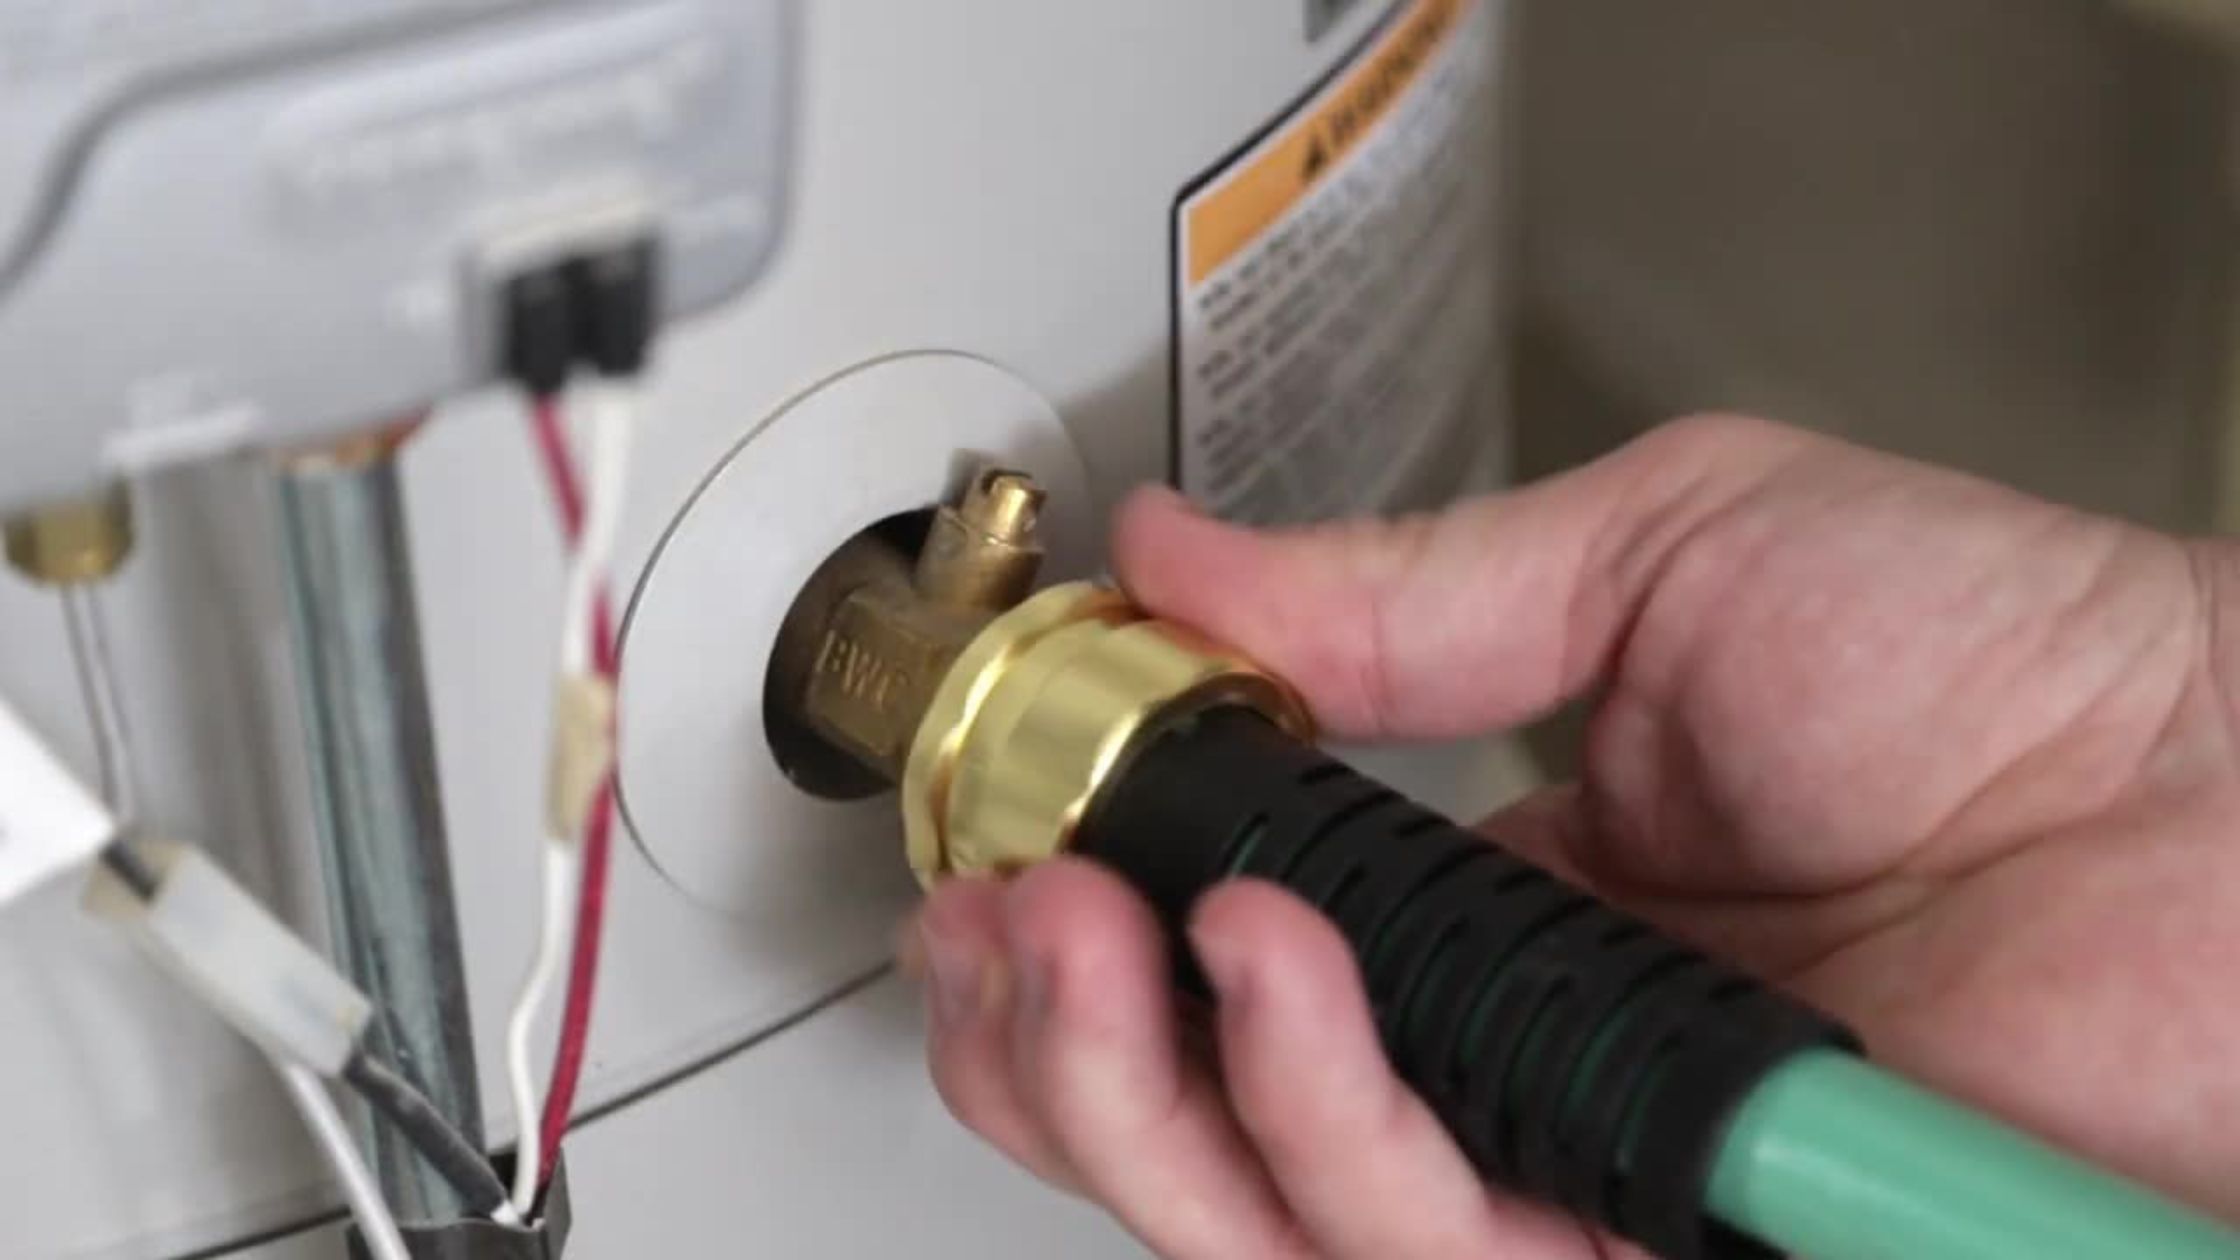 How to Replace Water Heater Drain Valve